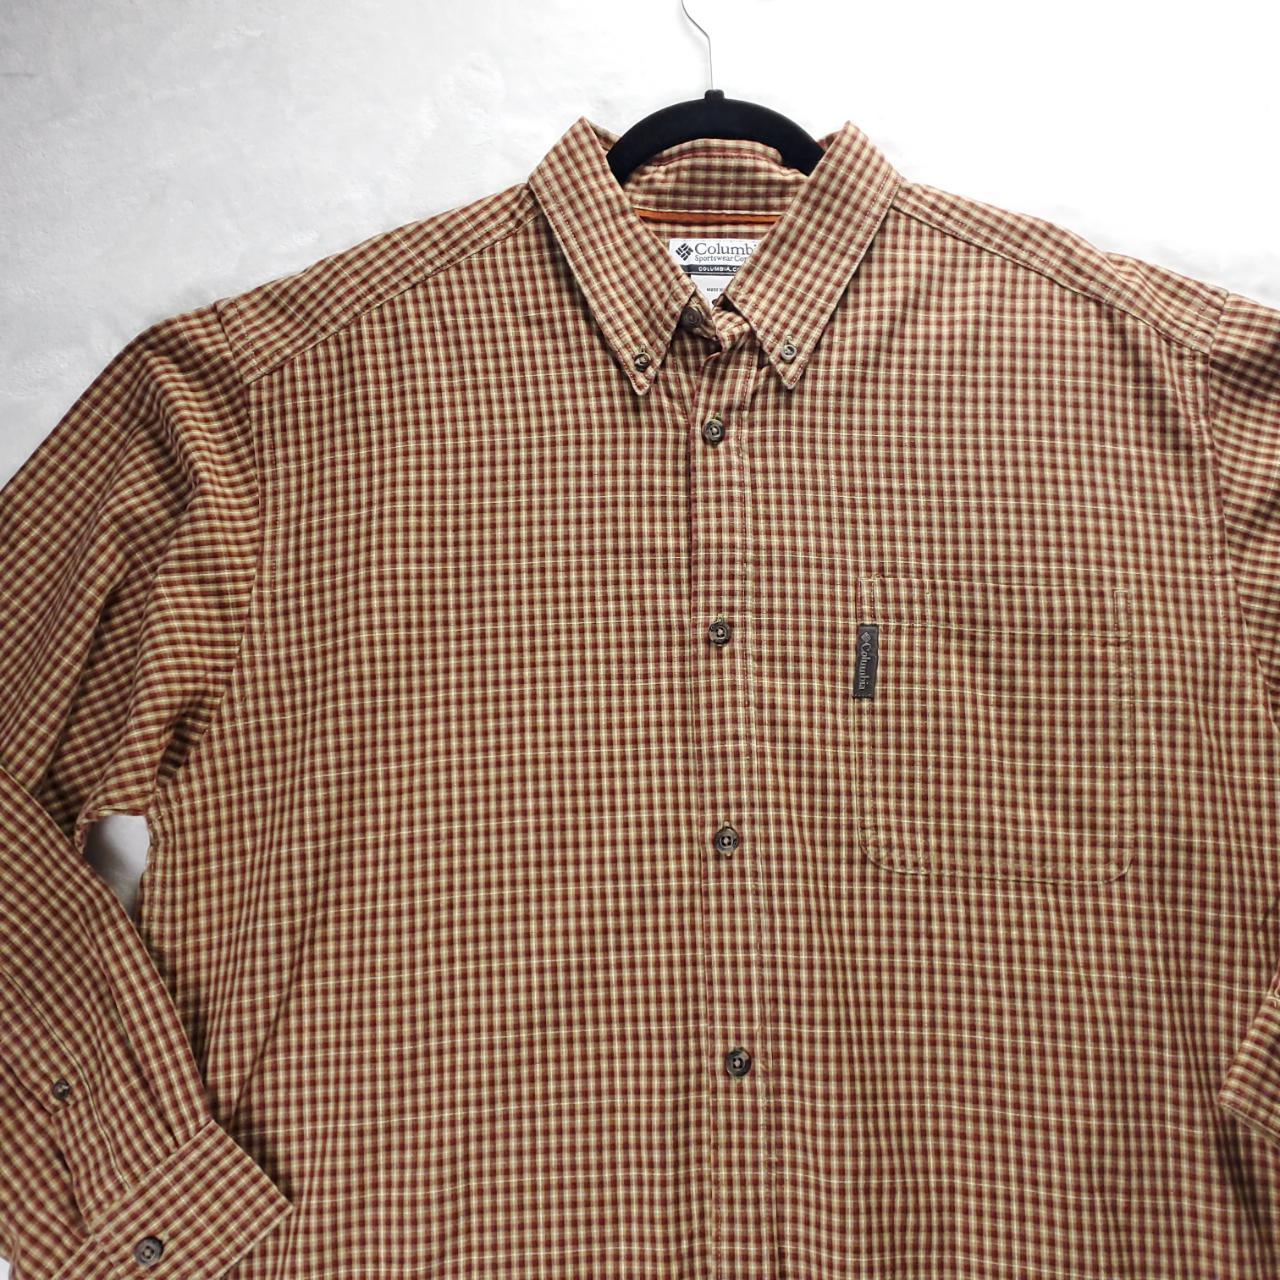 Product Image 2 - VINTAGE Columbia Sportswear Button Shirt